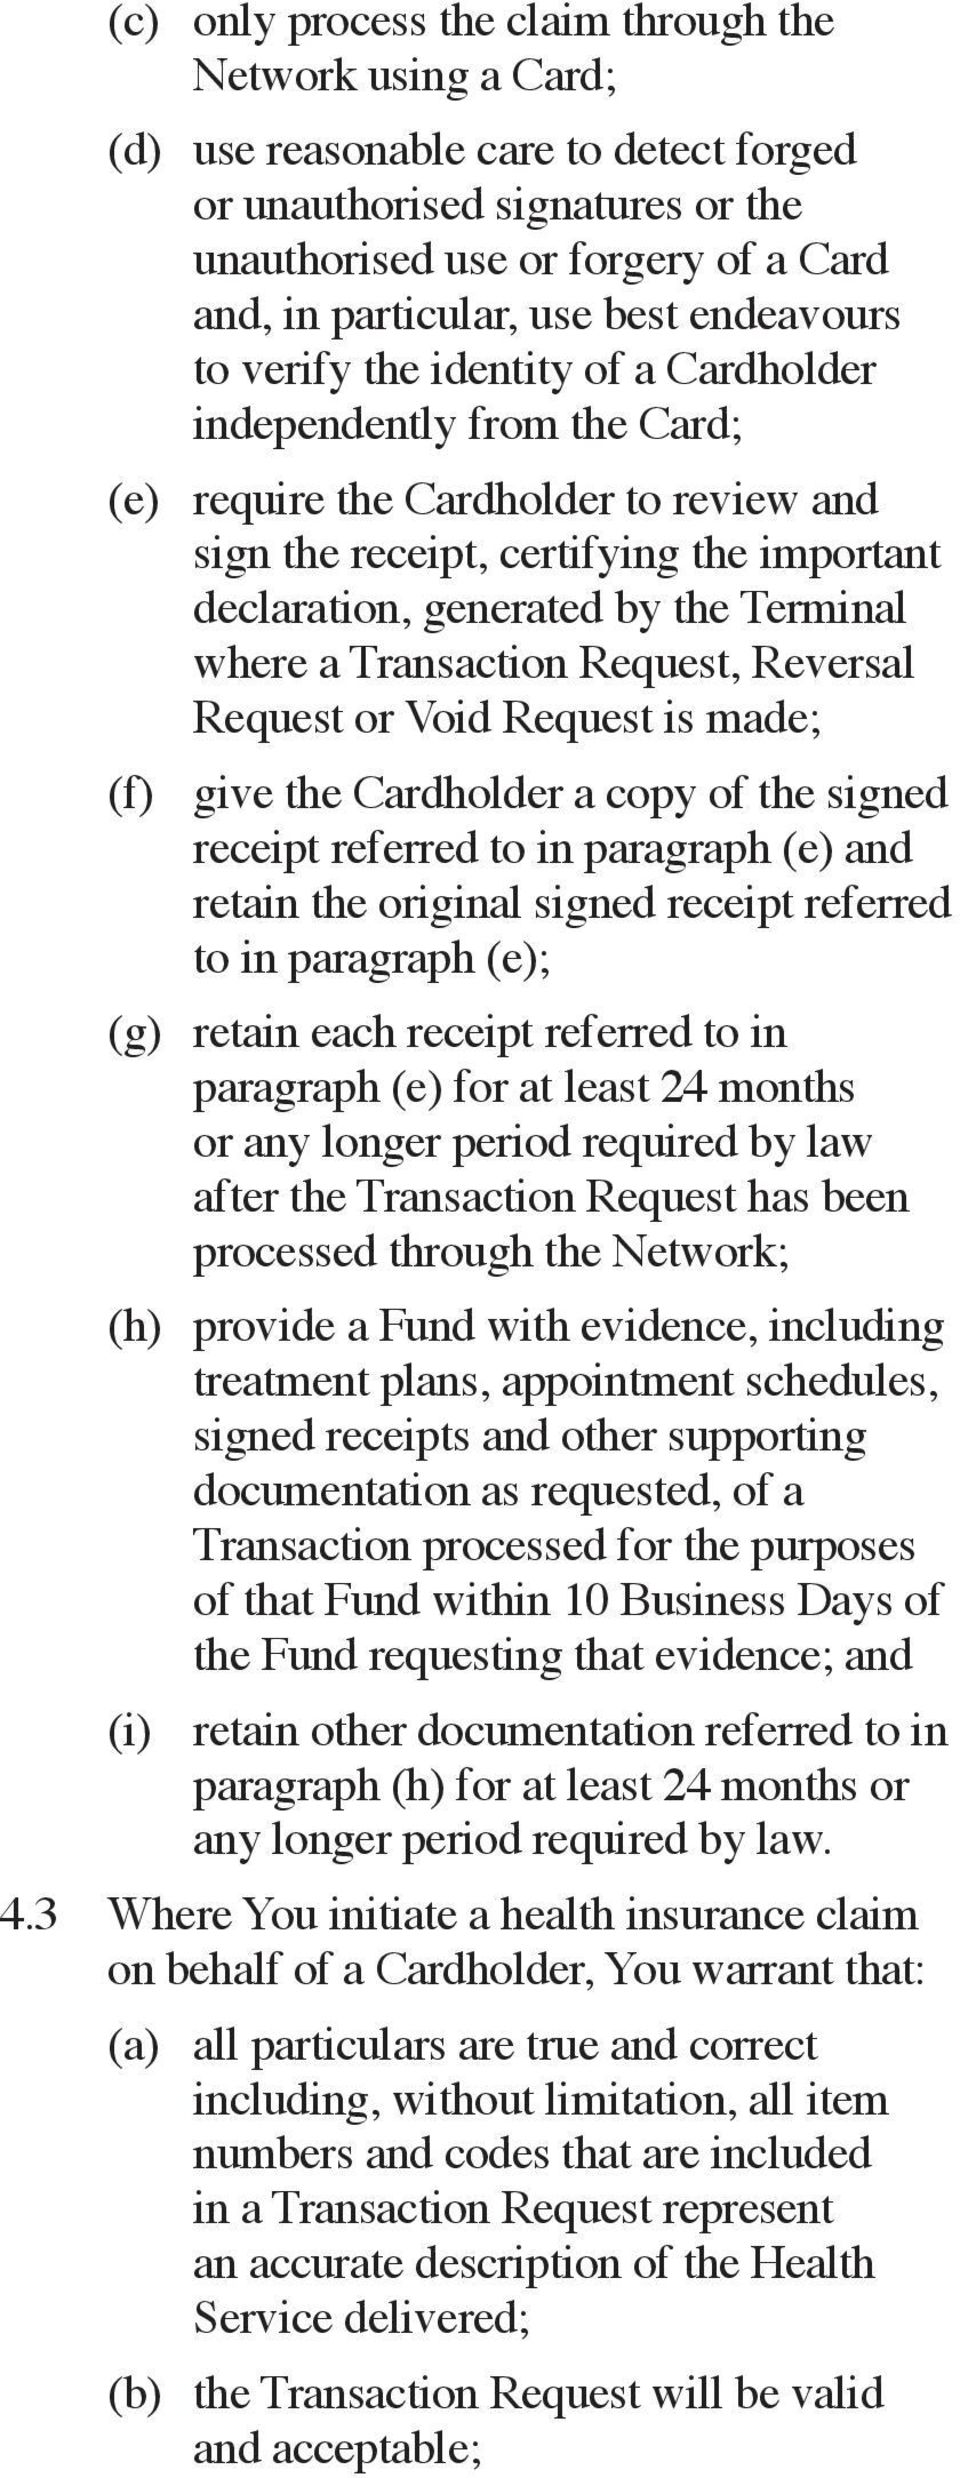 Terminal where a Transaction Request, Reversal Request or Void Request is made; (f) give the Cardholder a copy of the signed receipt referred to in paragraph (e) and retain the original signed